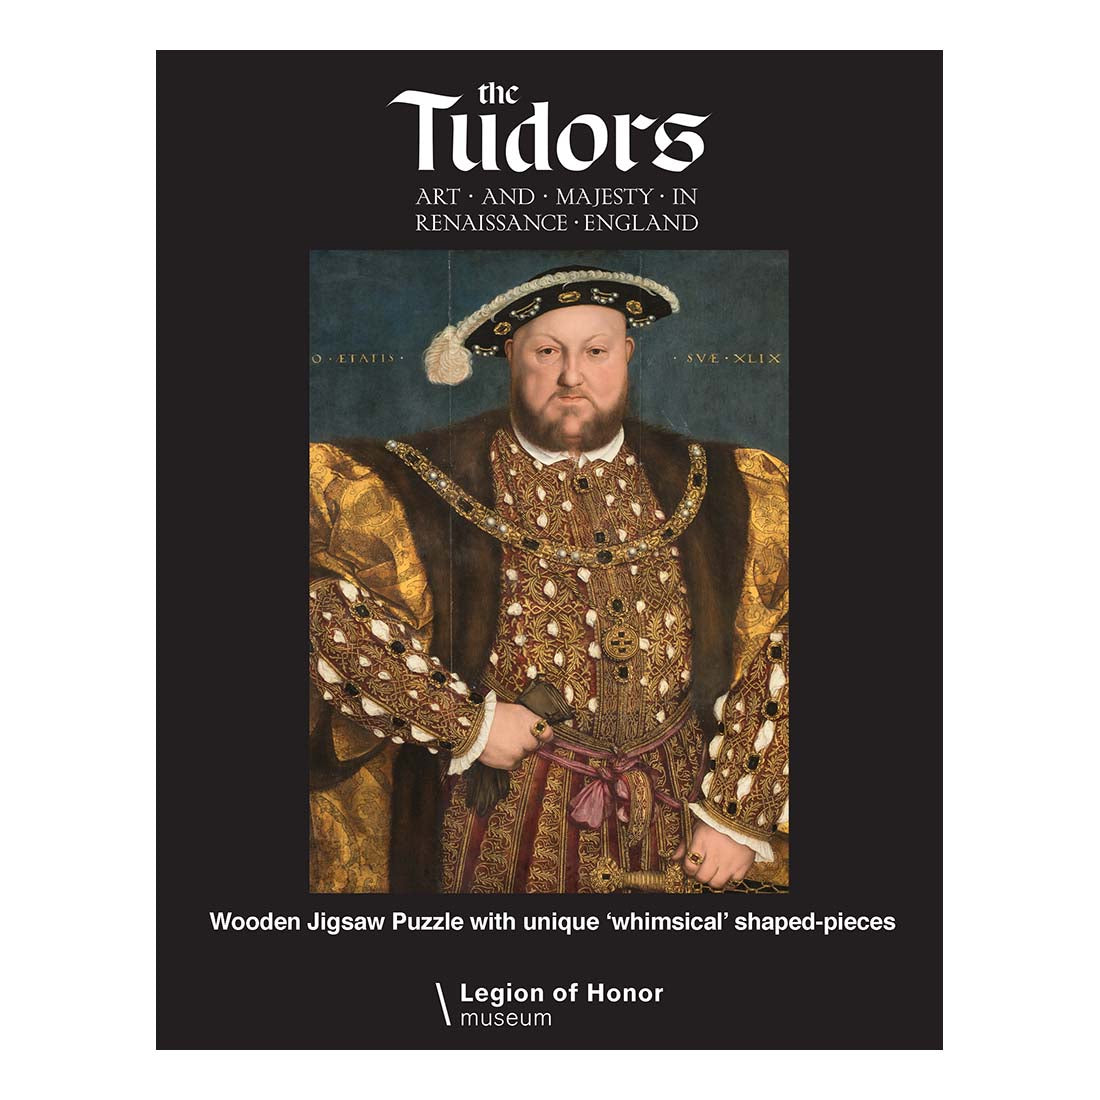 The Tudors Portrait of Henry VIII Wooden Puzzle